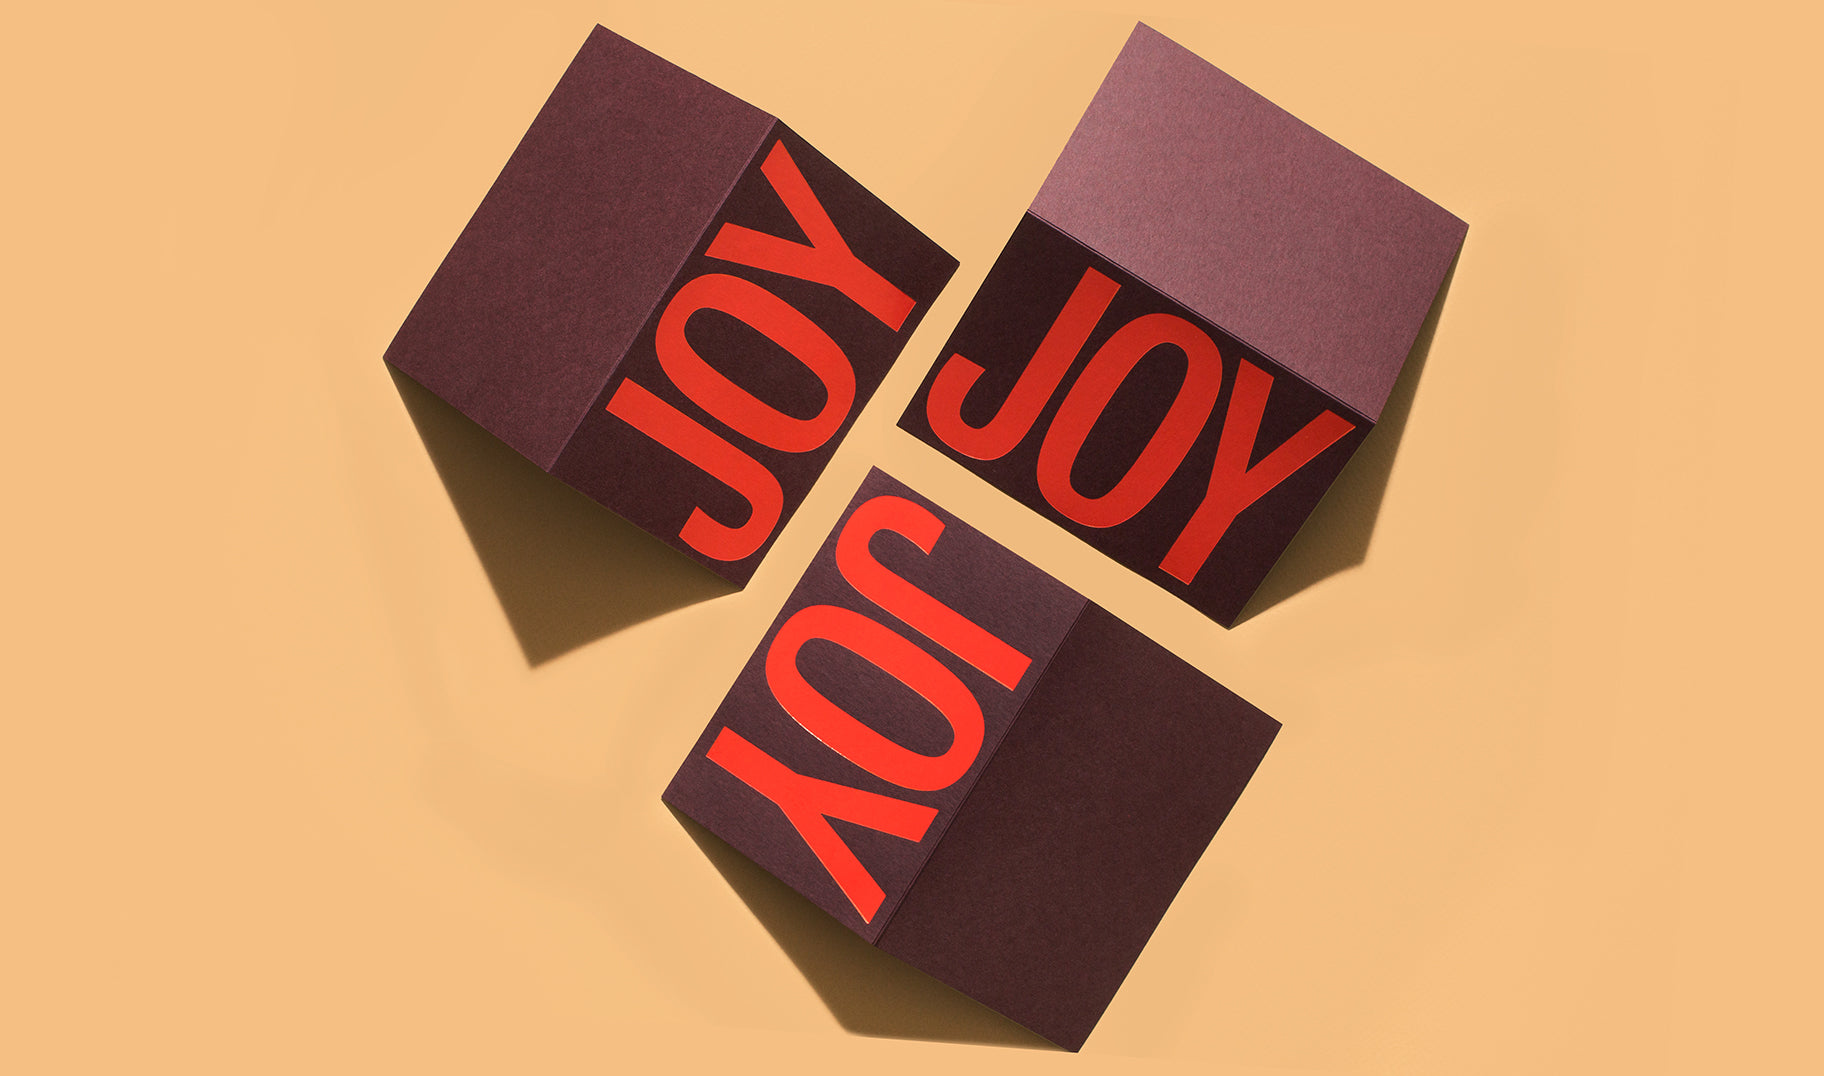 You will literally spread joy when you send these holiday cards. Featuring a orange foil on burgundy Mohawk Keaykolour paper.